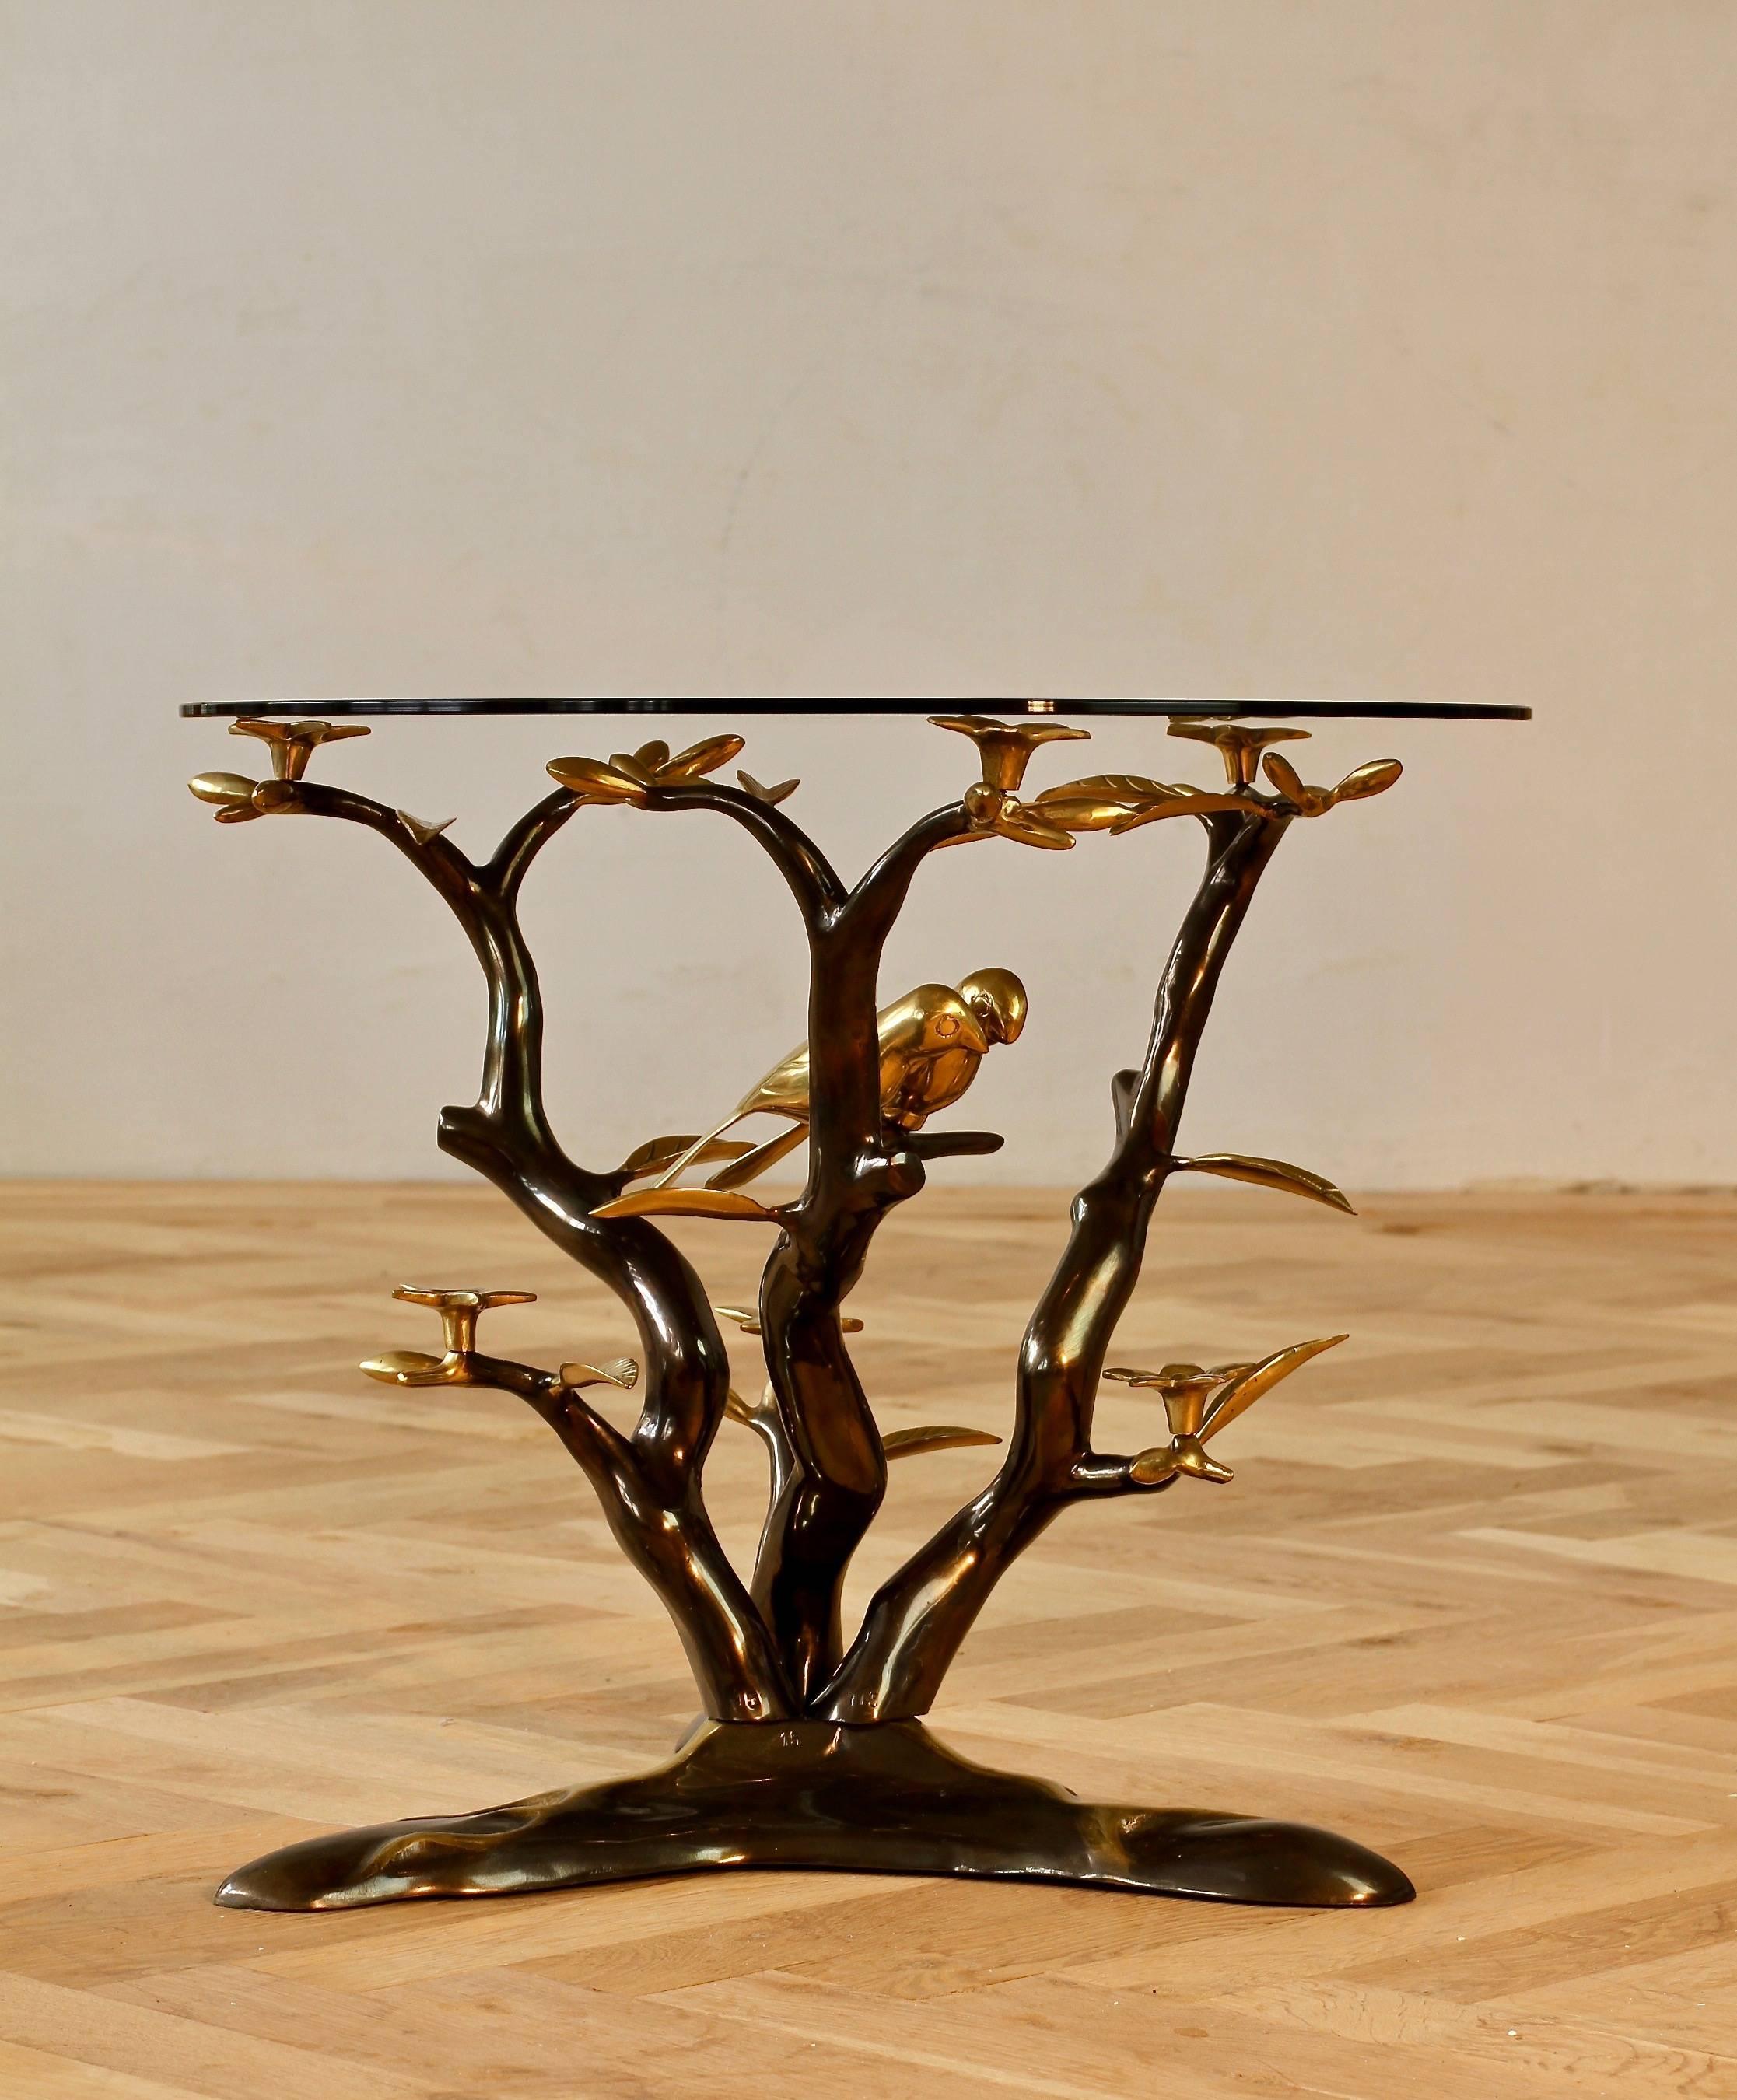 A beautifully designed and crafted side or end table after Willy Daro, circa 1975. Cast in brass - the 'lovebirds' nestle amongst the branches of the 'Bonsai' tree, which support the round smoked glass tabletop, have delightful bronze finish, adding